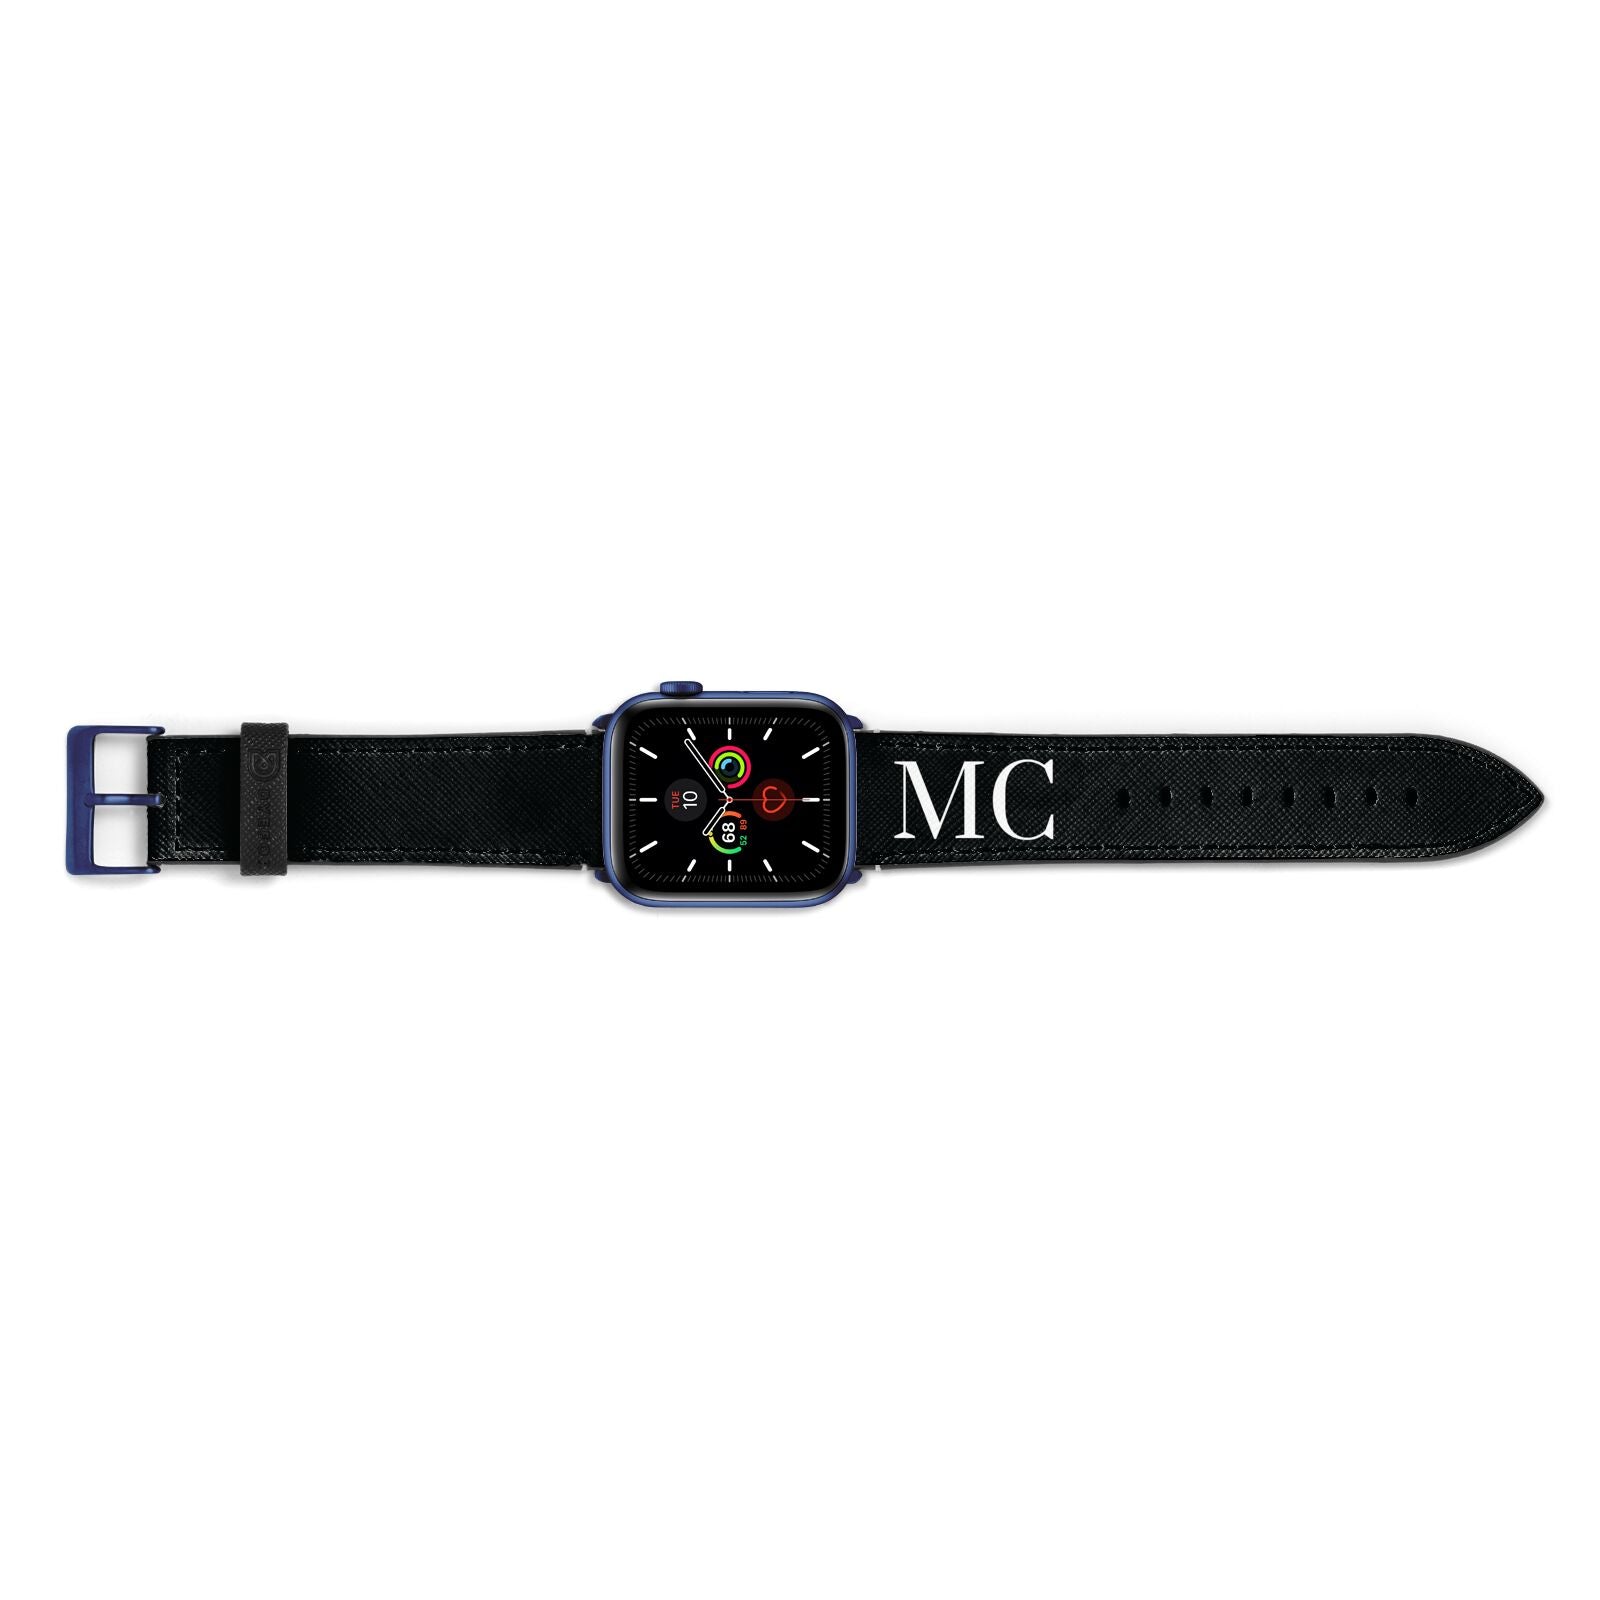 Initials Personalised 1 Apple Watch Strap Landscape Image Blue Hardware